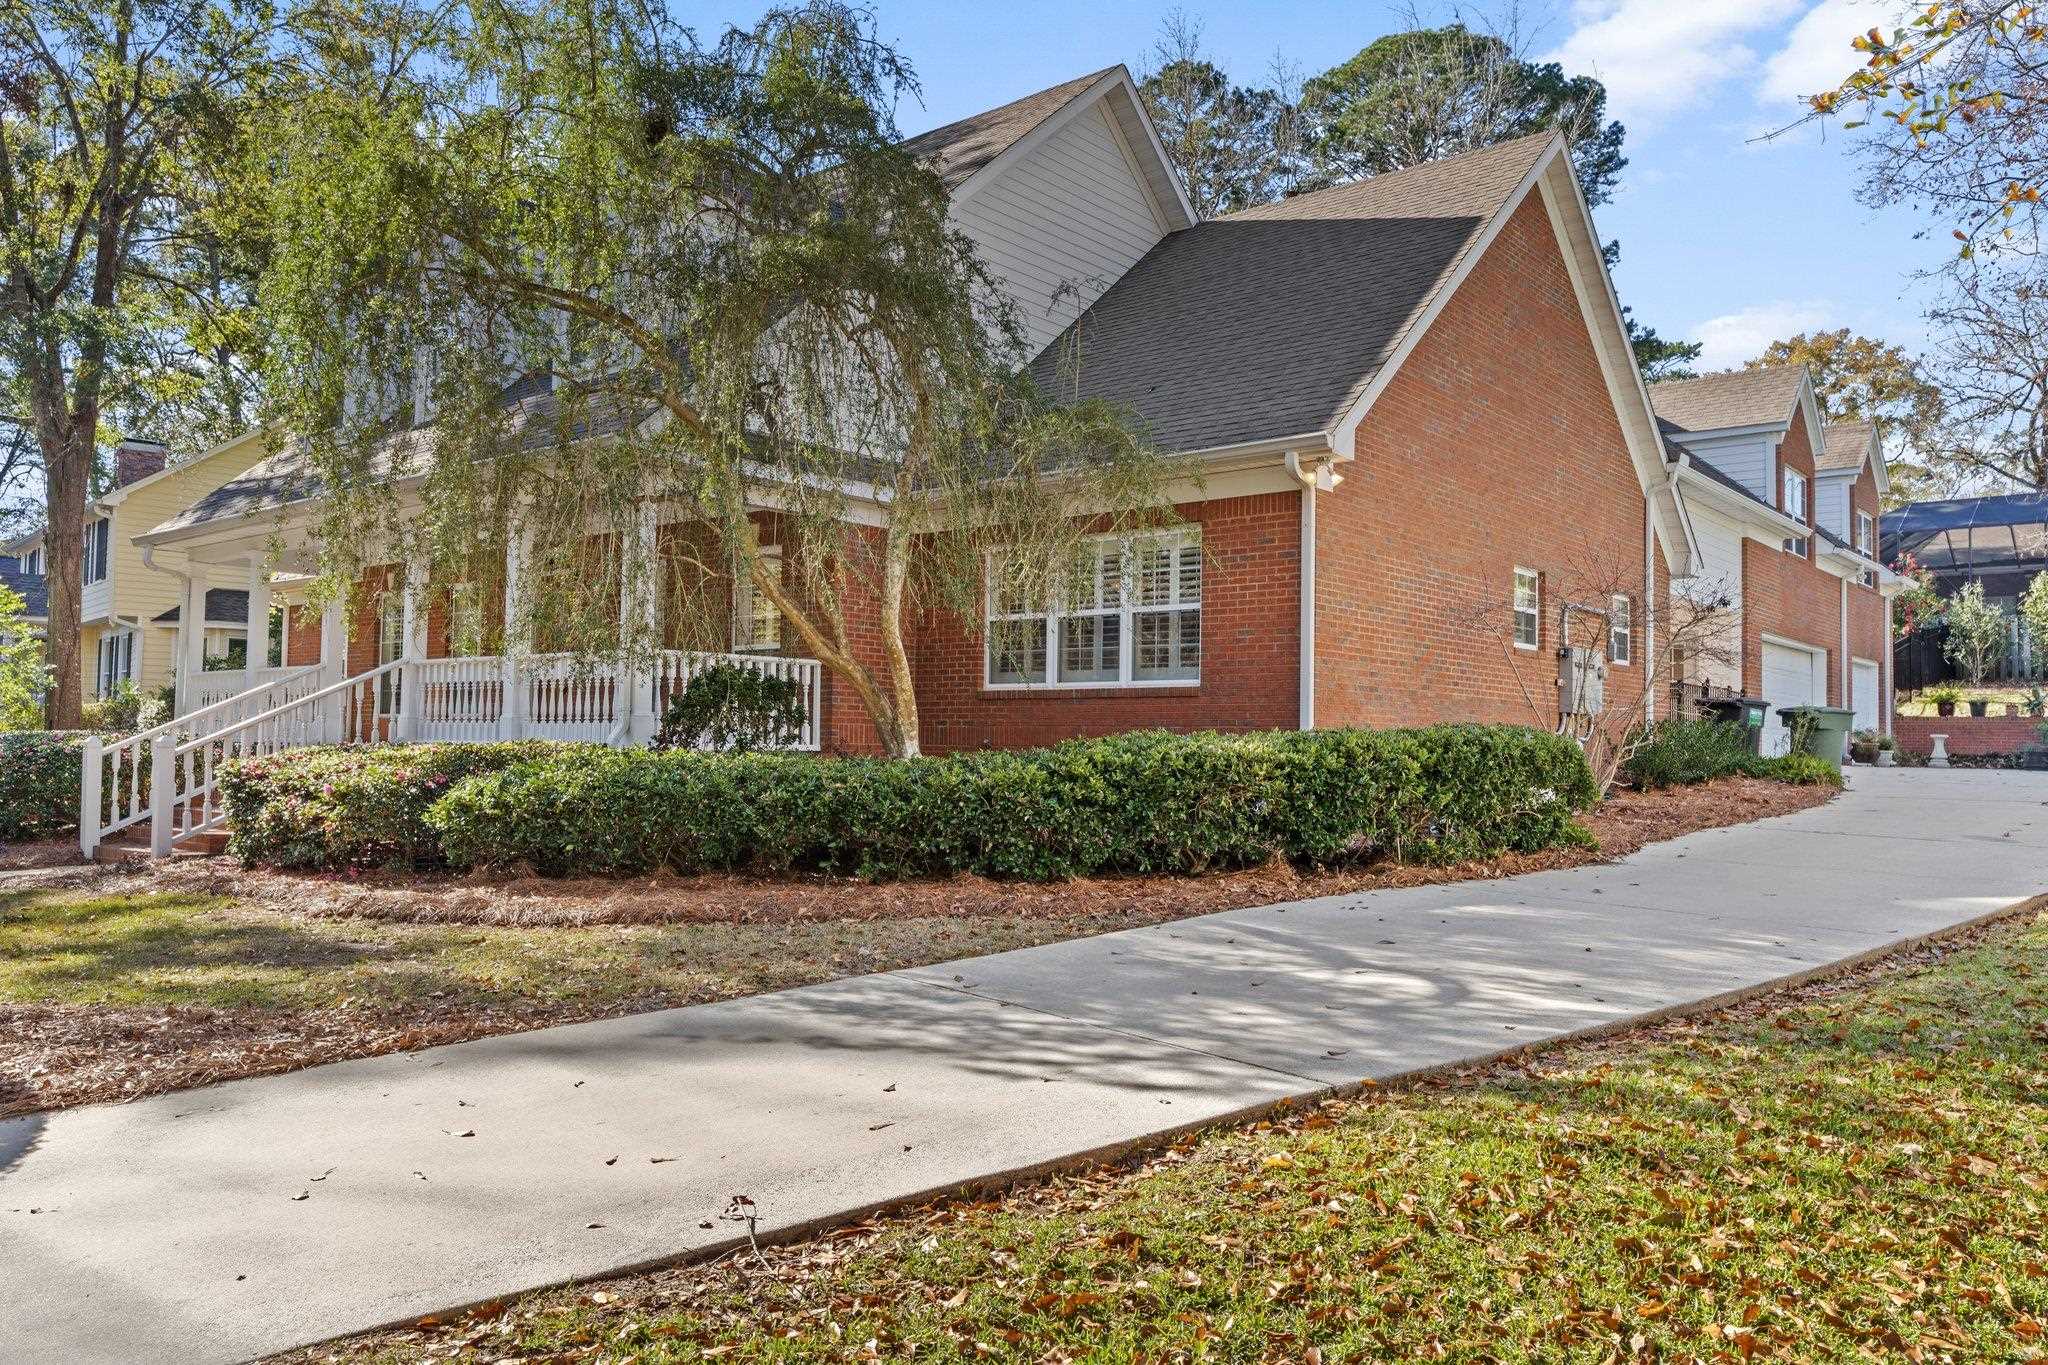 2510 Betton Woods Drive,TALLAHASSEE,Florida 32308,5 Bedrooms Bedrooms,4 BathroomsBathrooms,Detached single family,2510 Betton Woods Drive,369386